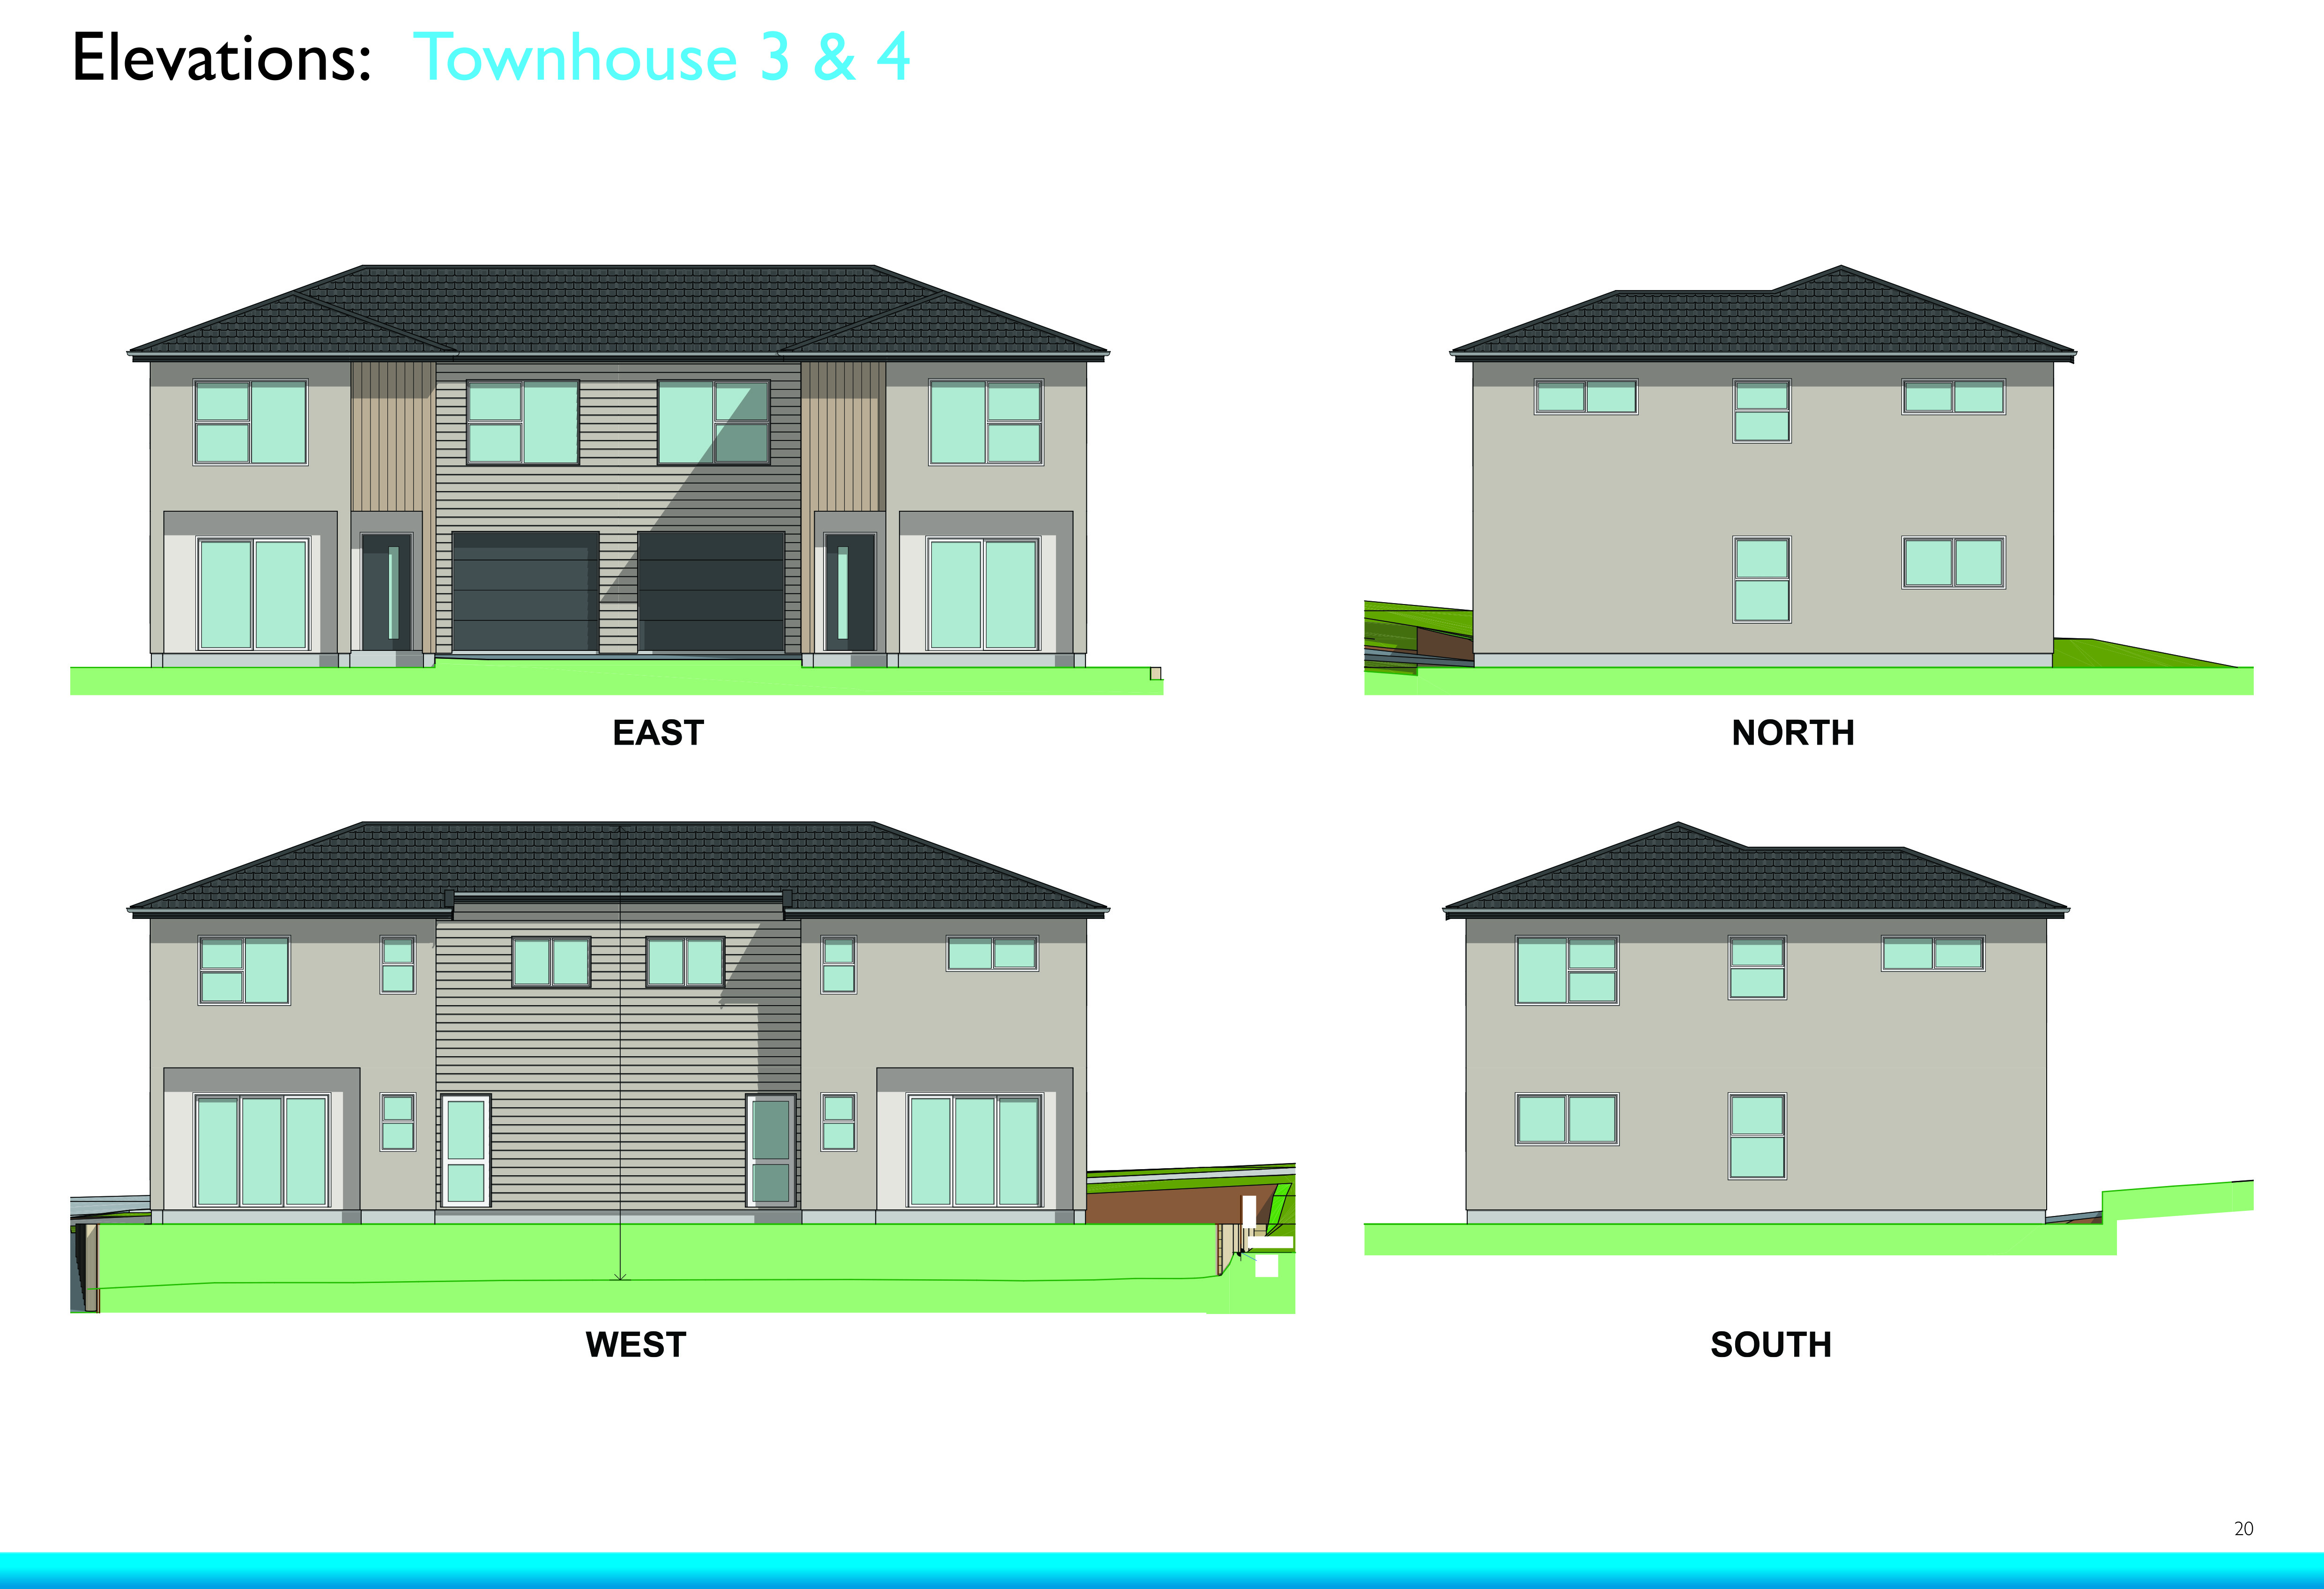 Townhouse 3 and 4 elevations